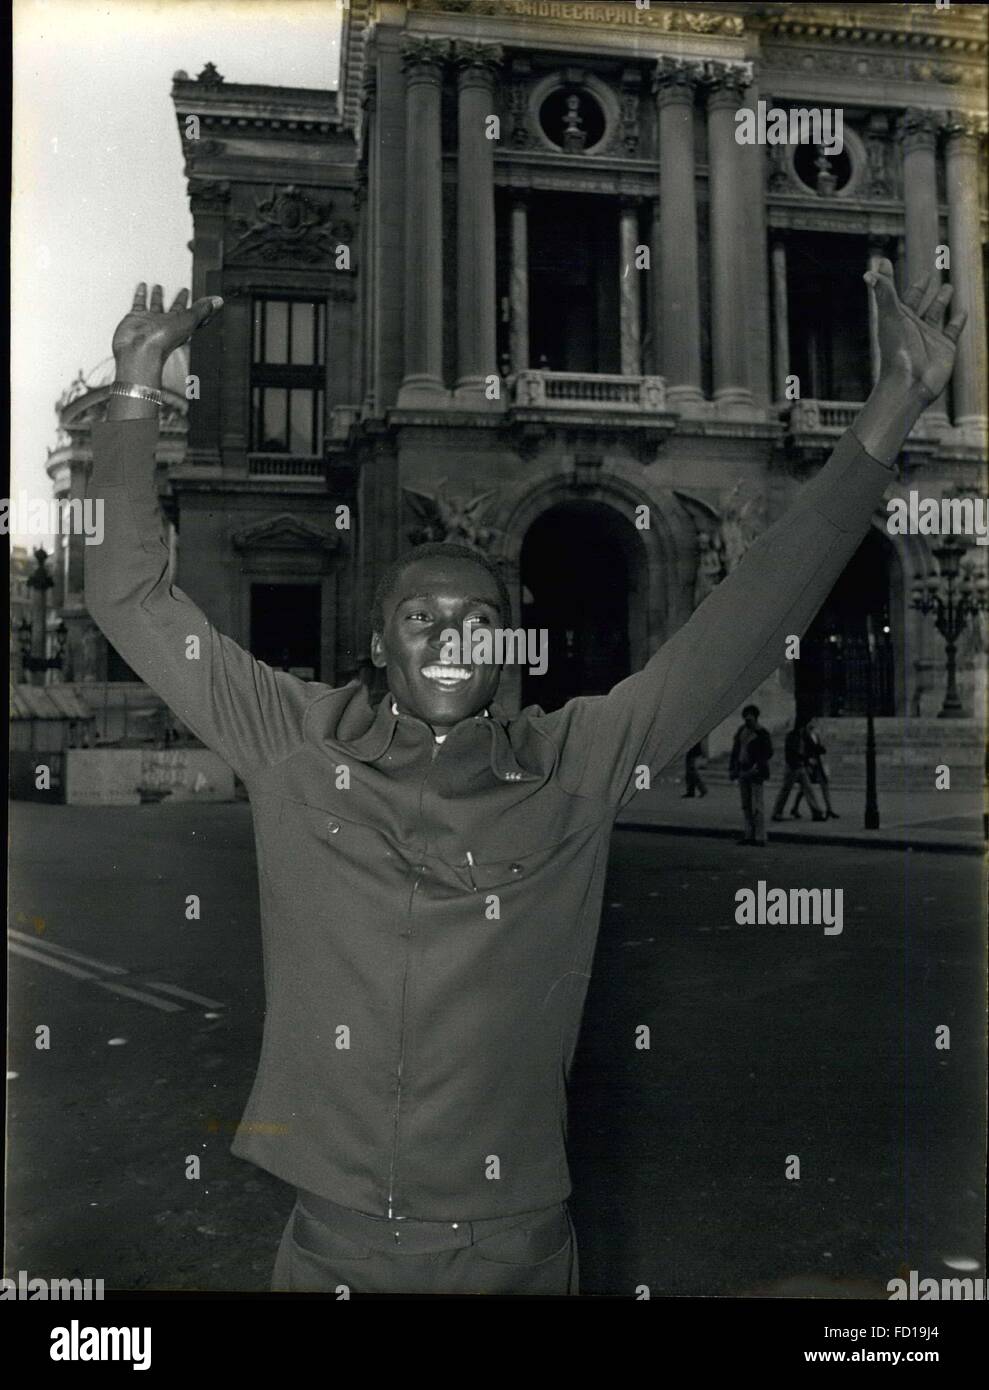 1968 - Hello, Paris: Olympic Black Champion On Visit To French Capital Akii Bua, the black athlete, Olympic Gold Medal and holder of world's 400 M. hurdles record is now in Paris as a guest of the African weekly ''Jeune Afrique:. OPS: Akii Bua pictured before the Paris Opera House and during his press conference. © Keystone Pictures USA/ZUMAPRESS.com/Alamy Live News Stock Photo